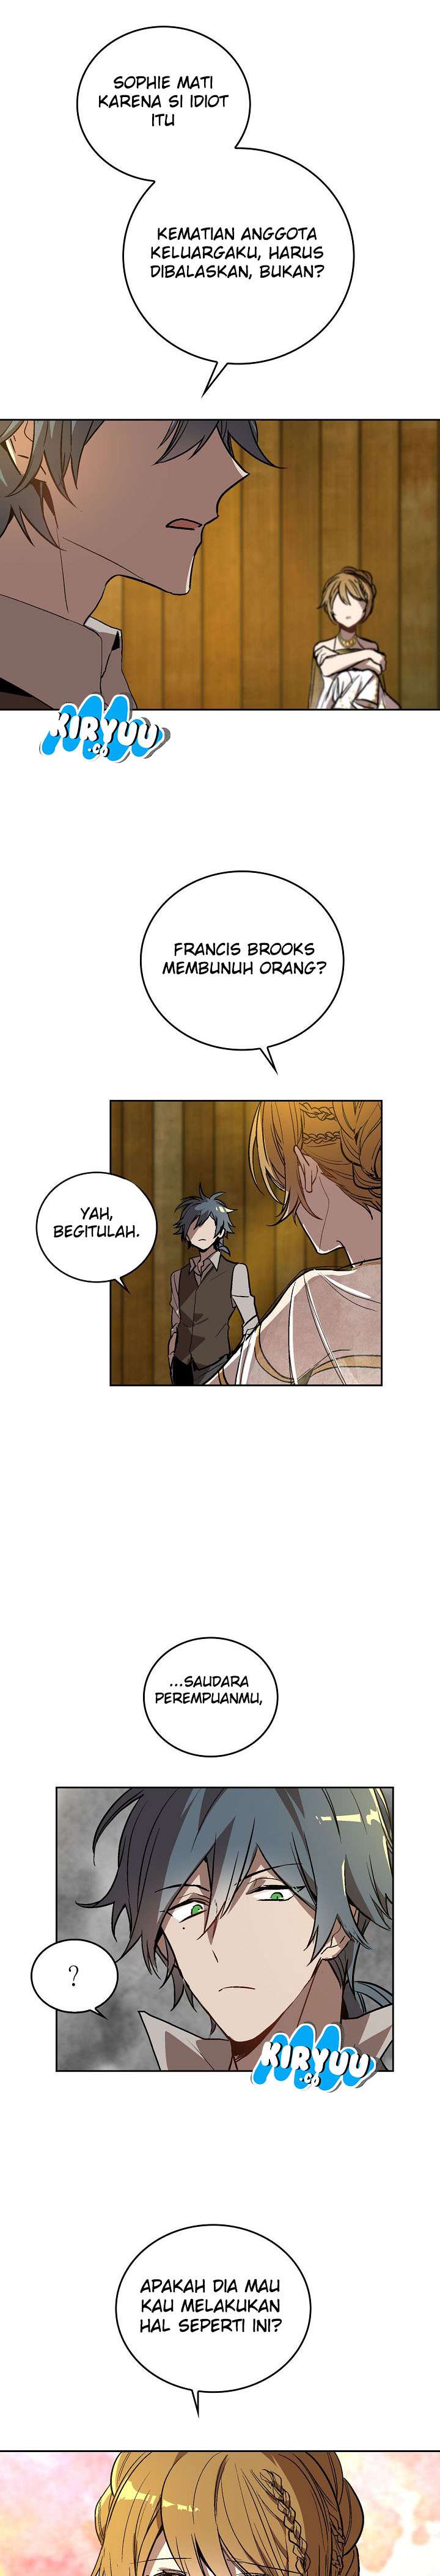 The Reason Why Raeliana Ended Up at the Duke’s Mansion Chapter 19 Bahasa Indonesia